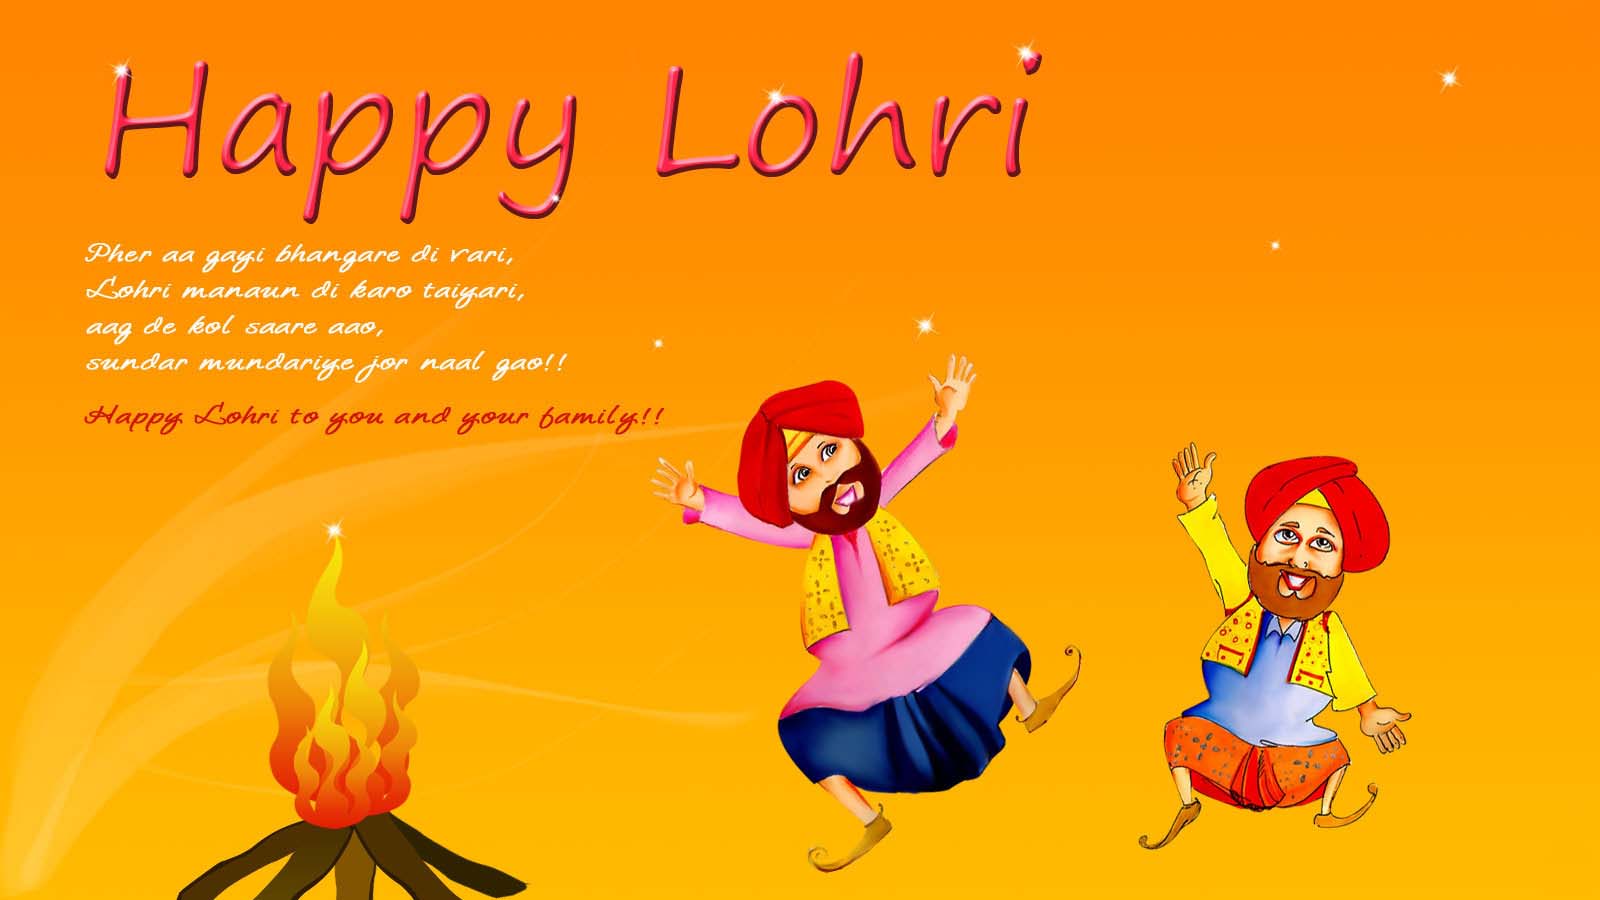 Happy Lohri To You And Your Family Wallpaper